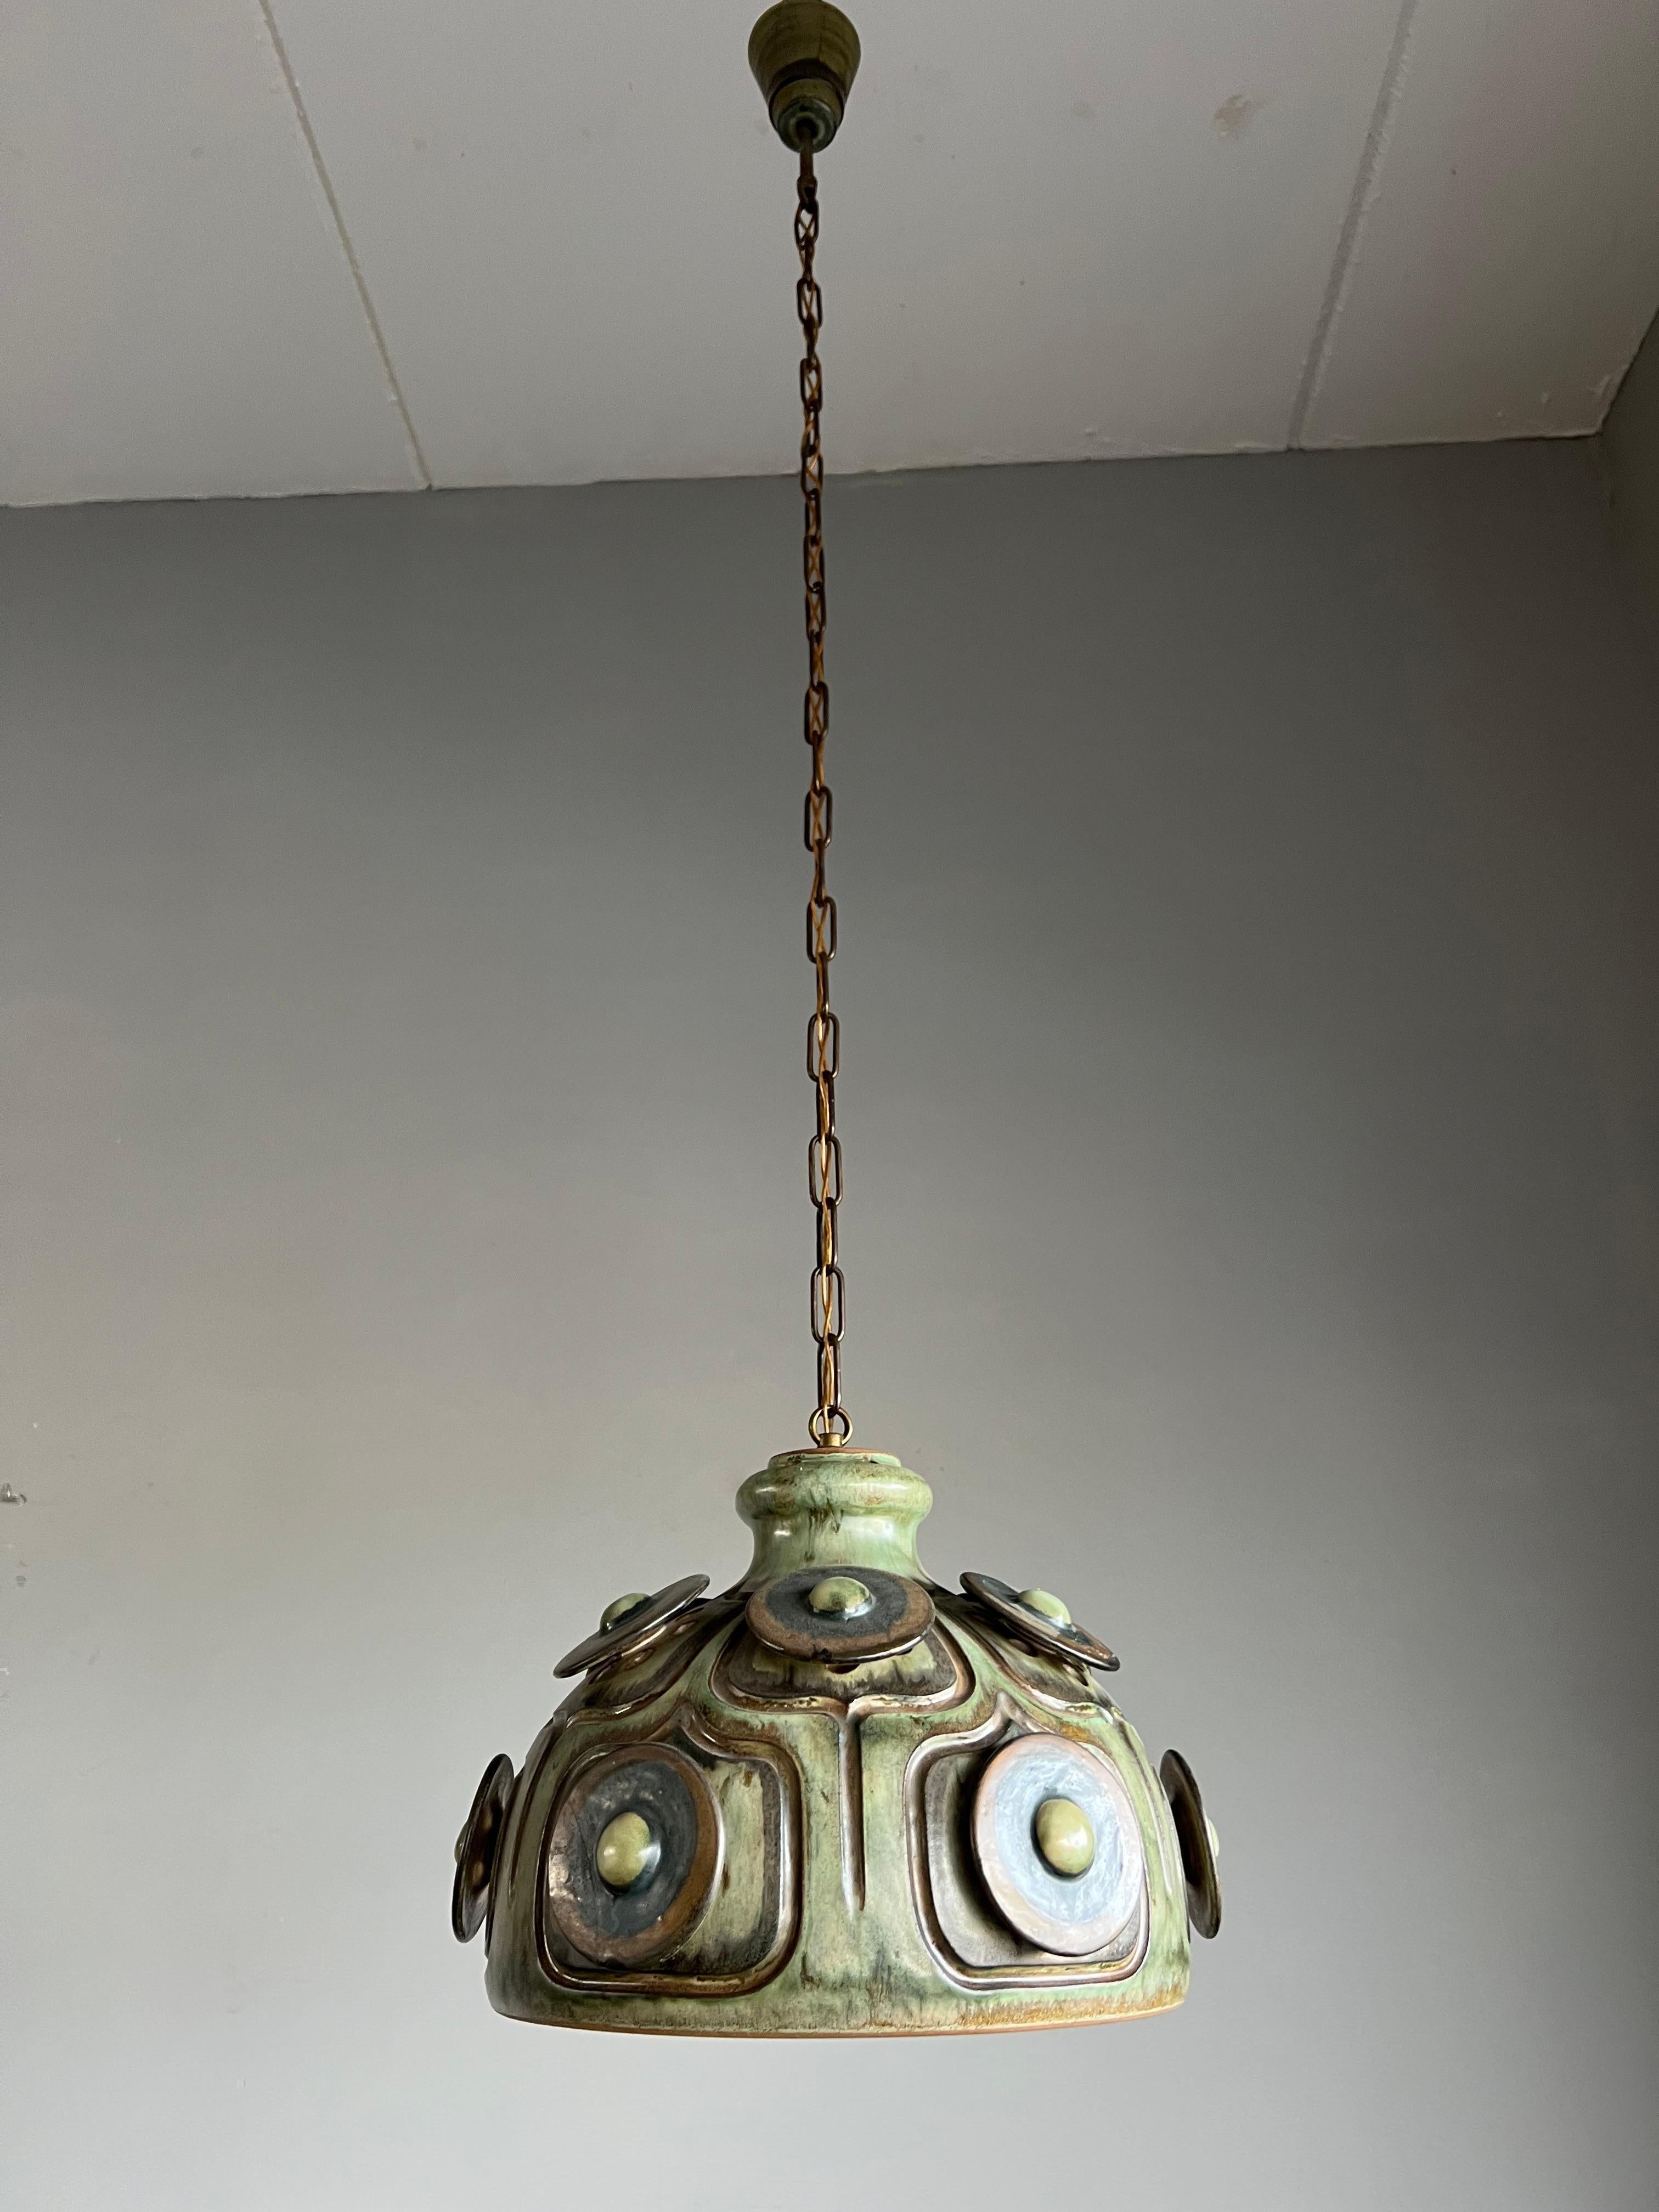 Beautiful green color and good size Danish hand-crafted fixture.

If you are looking for a stylish design, light to grace your home then this handmade specimen from the 1970s could be coming your way soon. With lighting as one of our specialities we